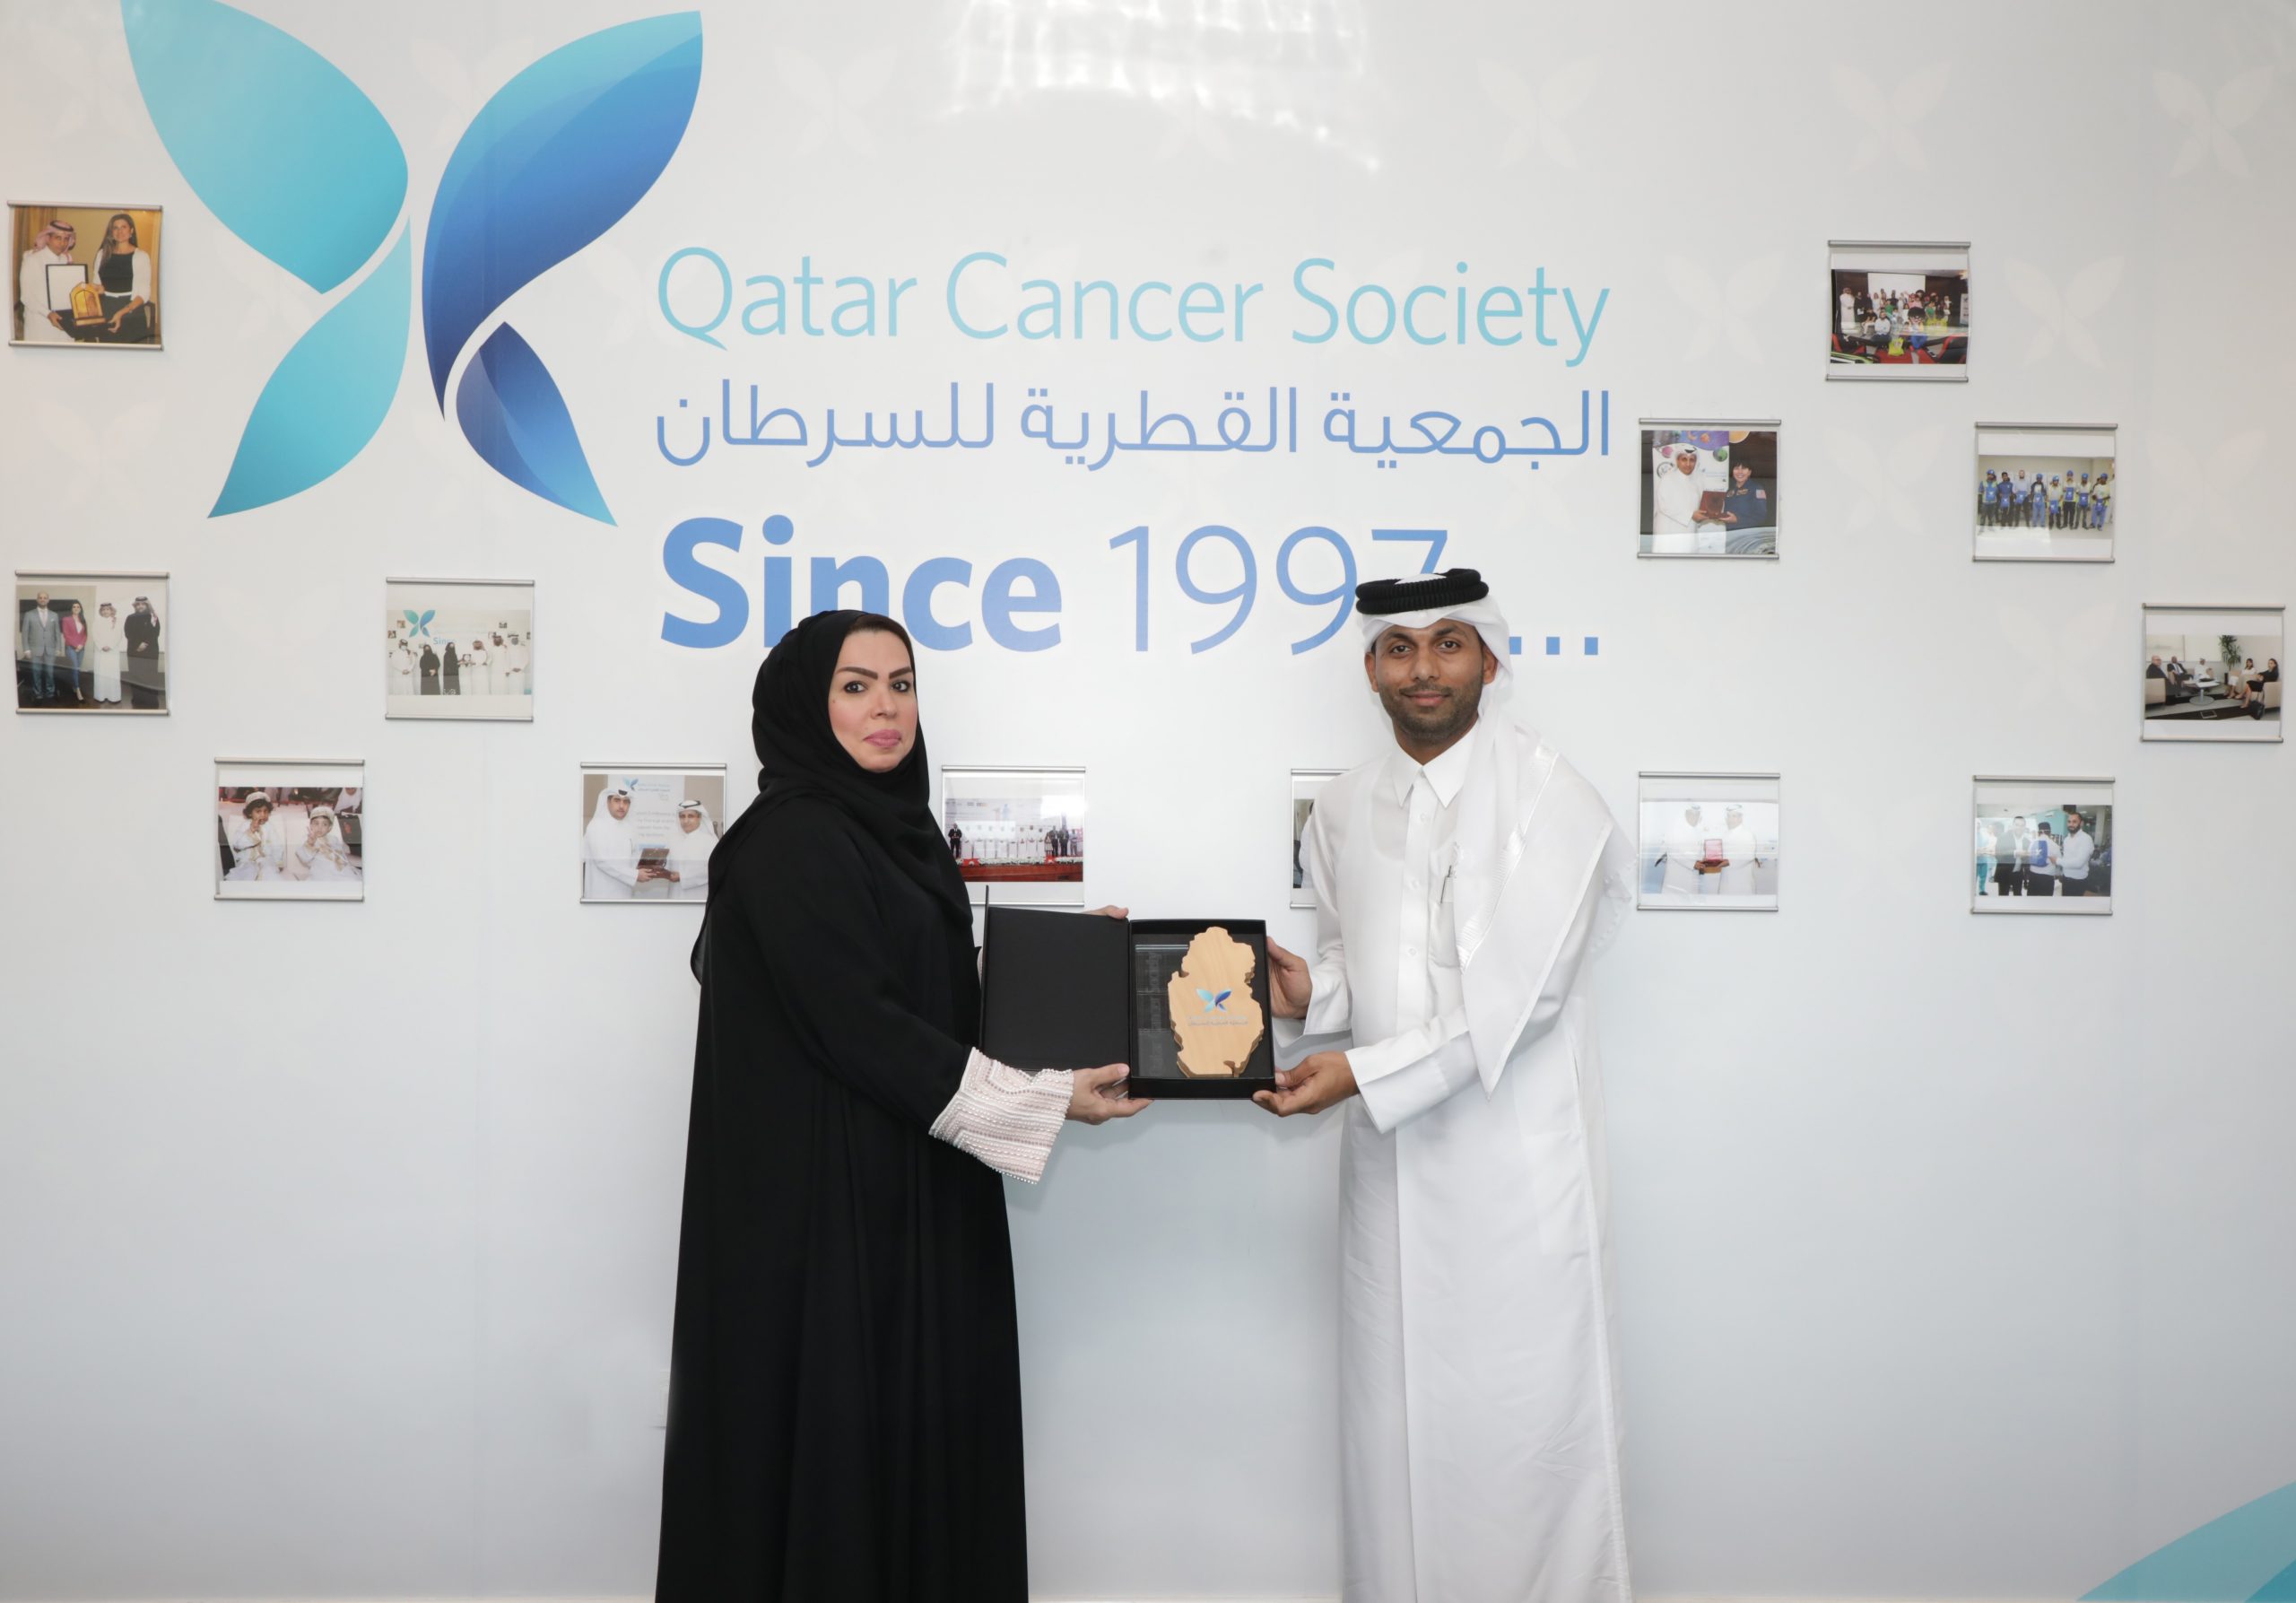 Uber, Qatar Cancer Society Launch ‘Trip to Recovery’ Initiative to Enable Access to Transportation For Patients